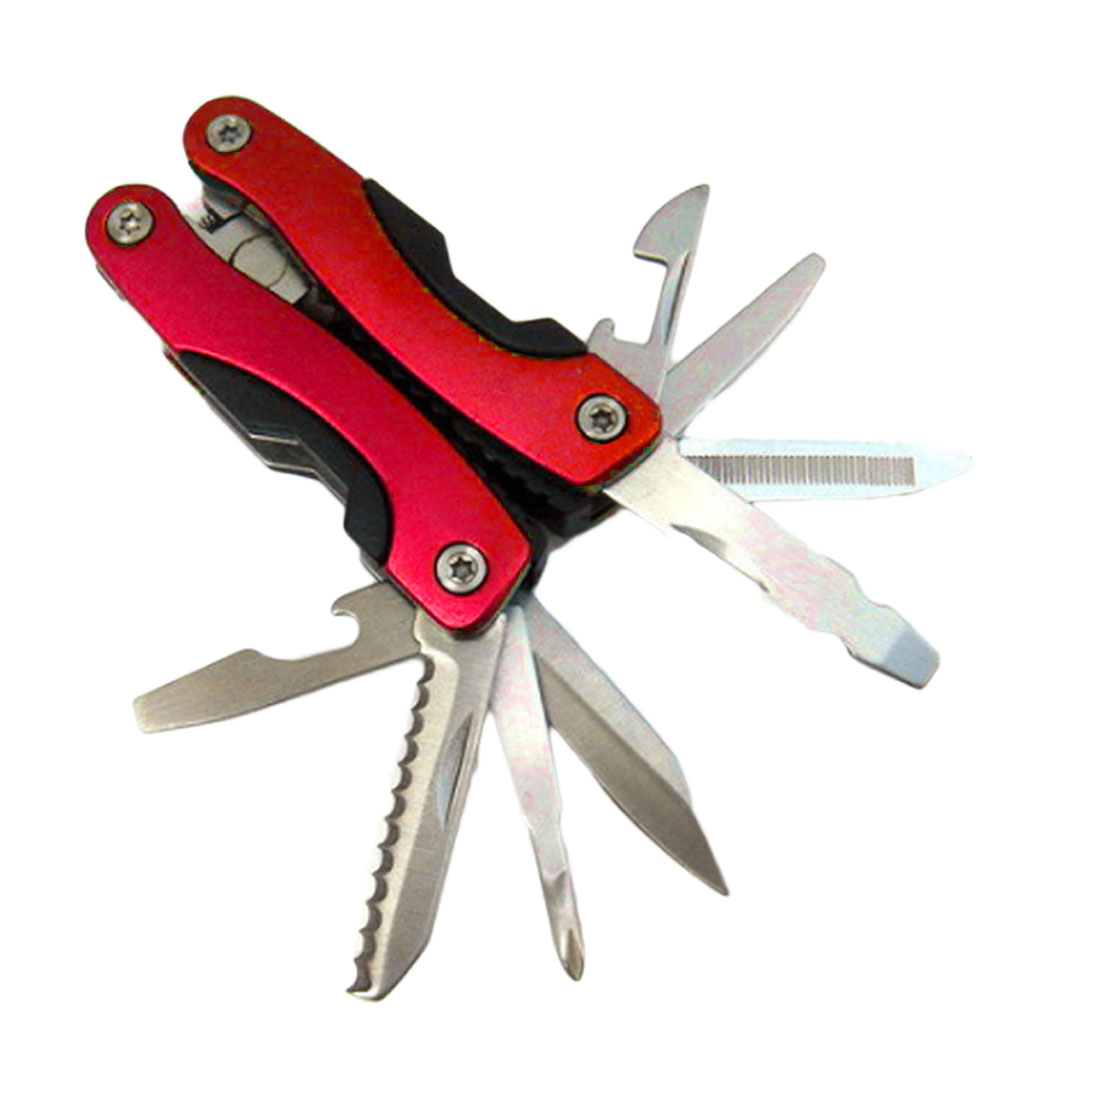 Outdoor Survival Stainless Steel Multi Tool Plier 9 In 1 Portable Compact Red